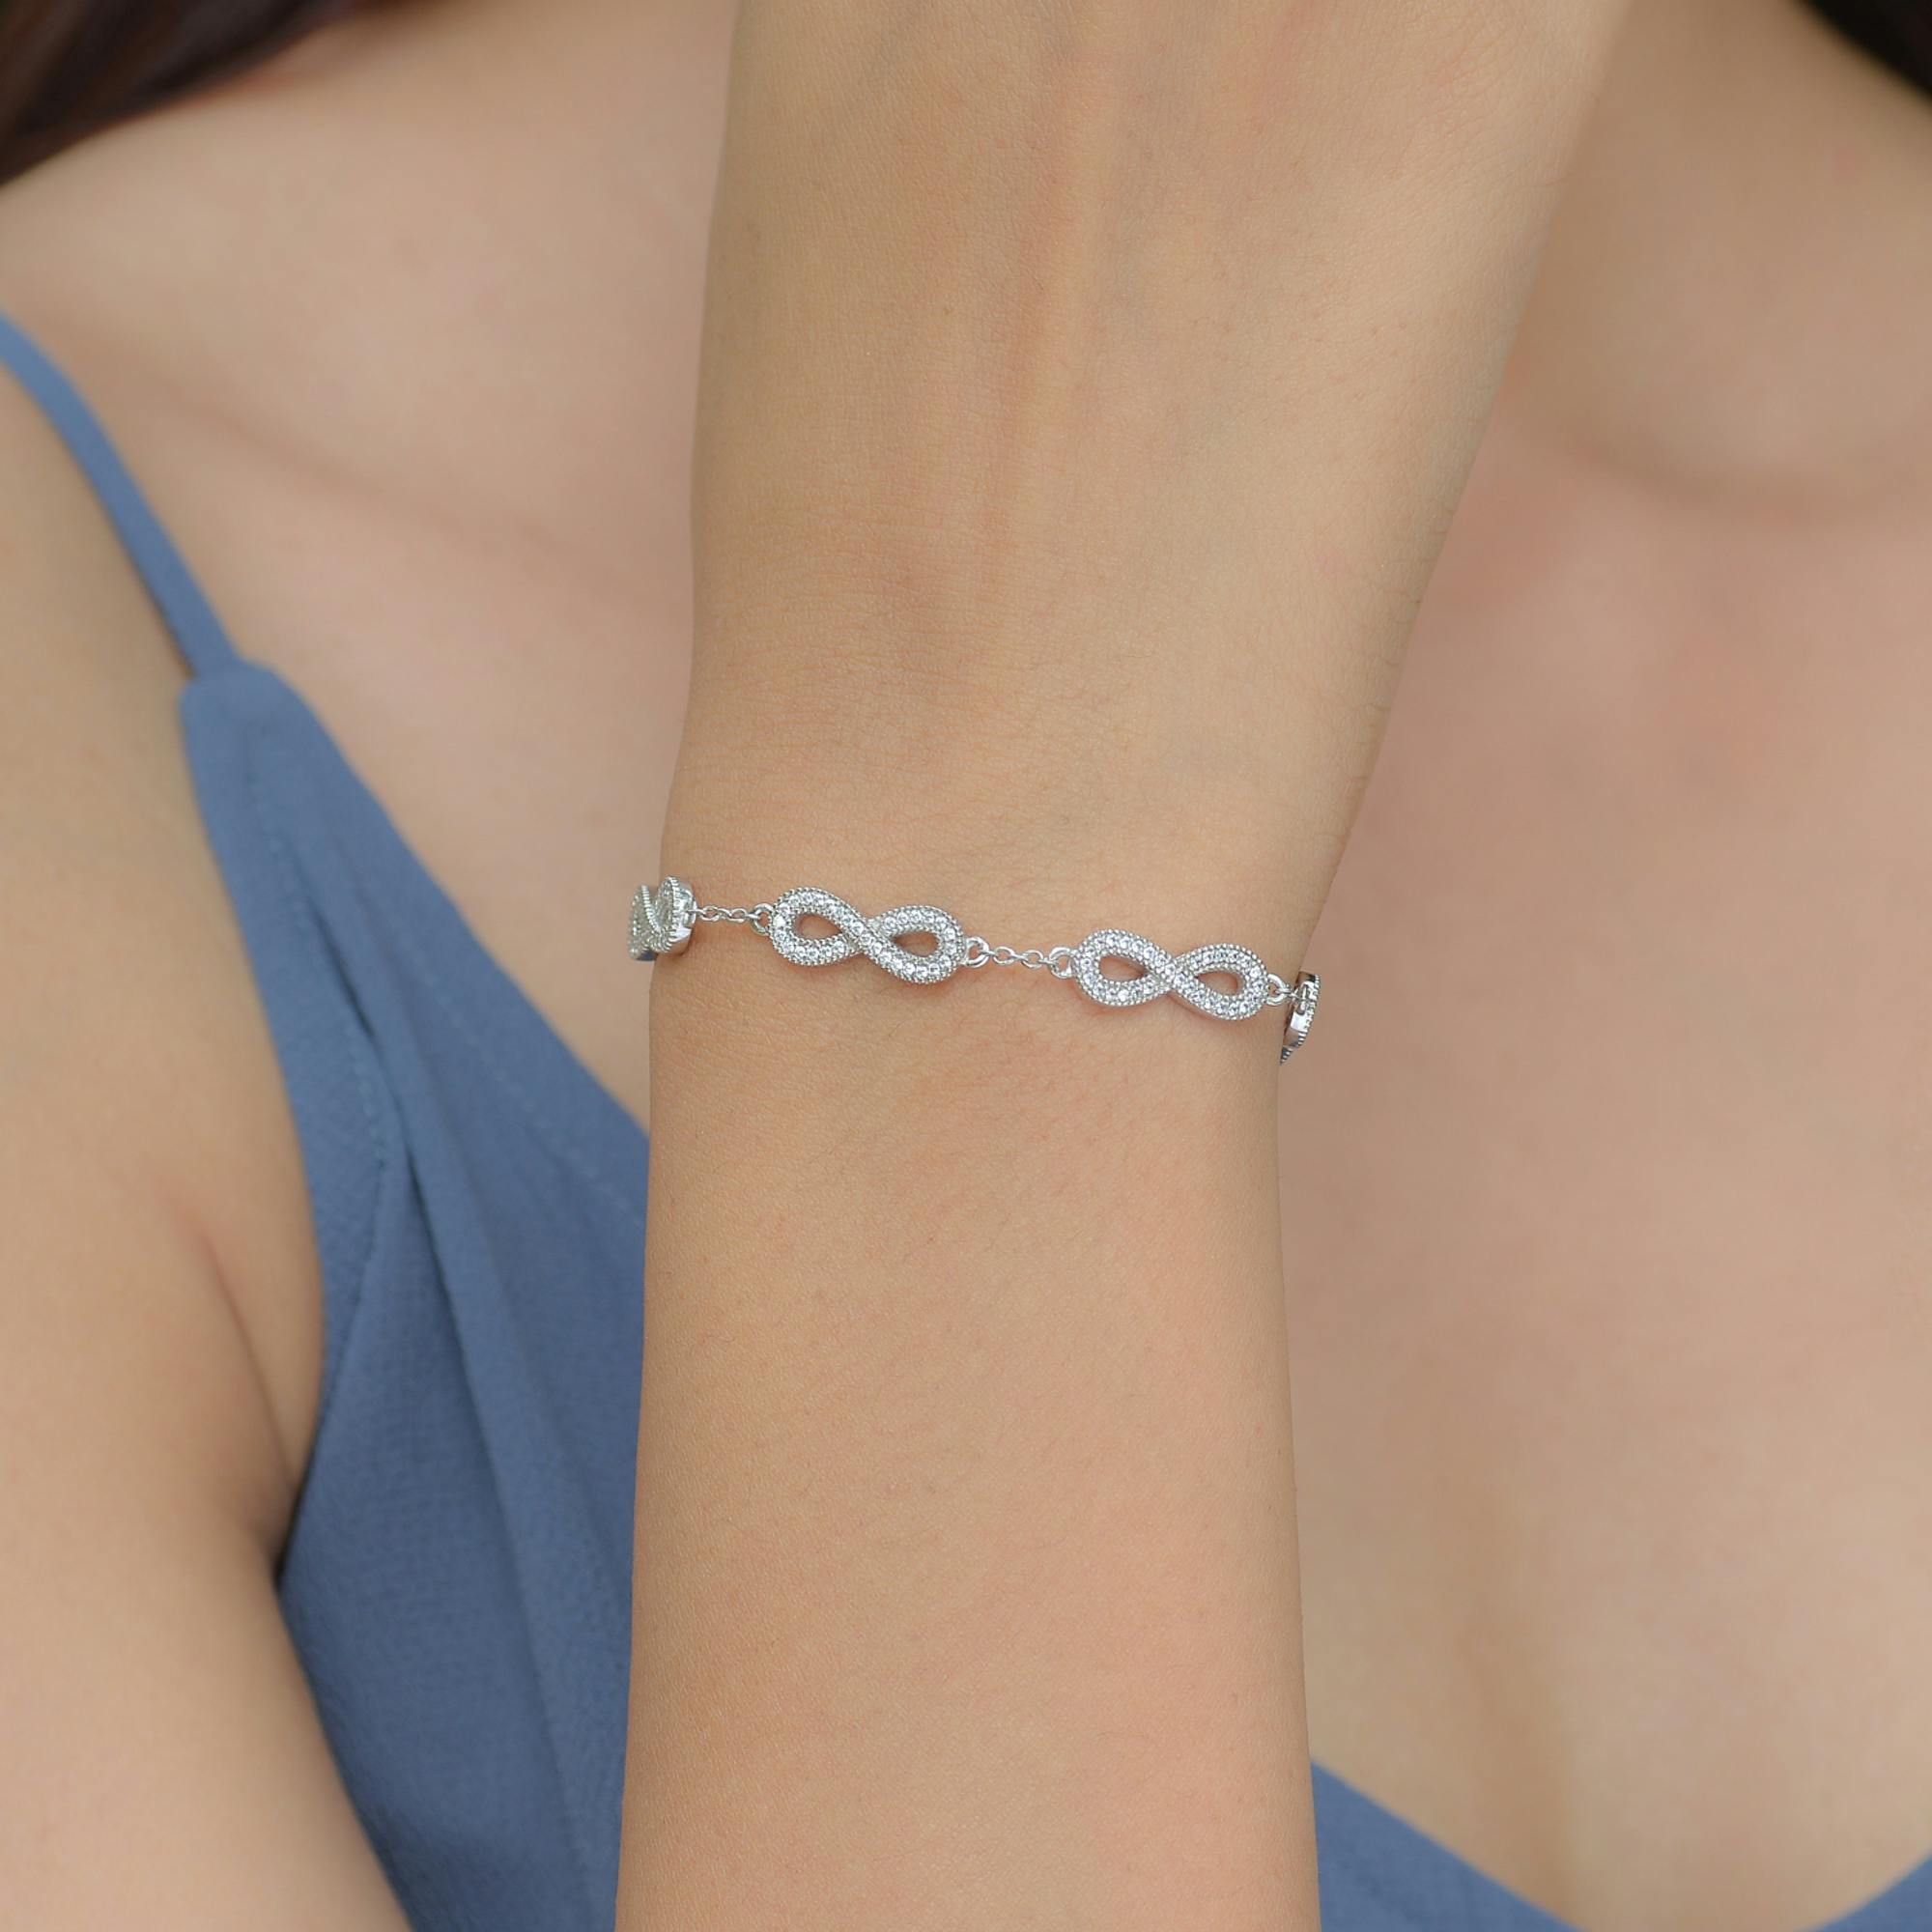 Delicate Starburst Chain Bracelet Sterling Silver – Hey Happiness